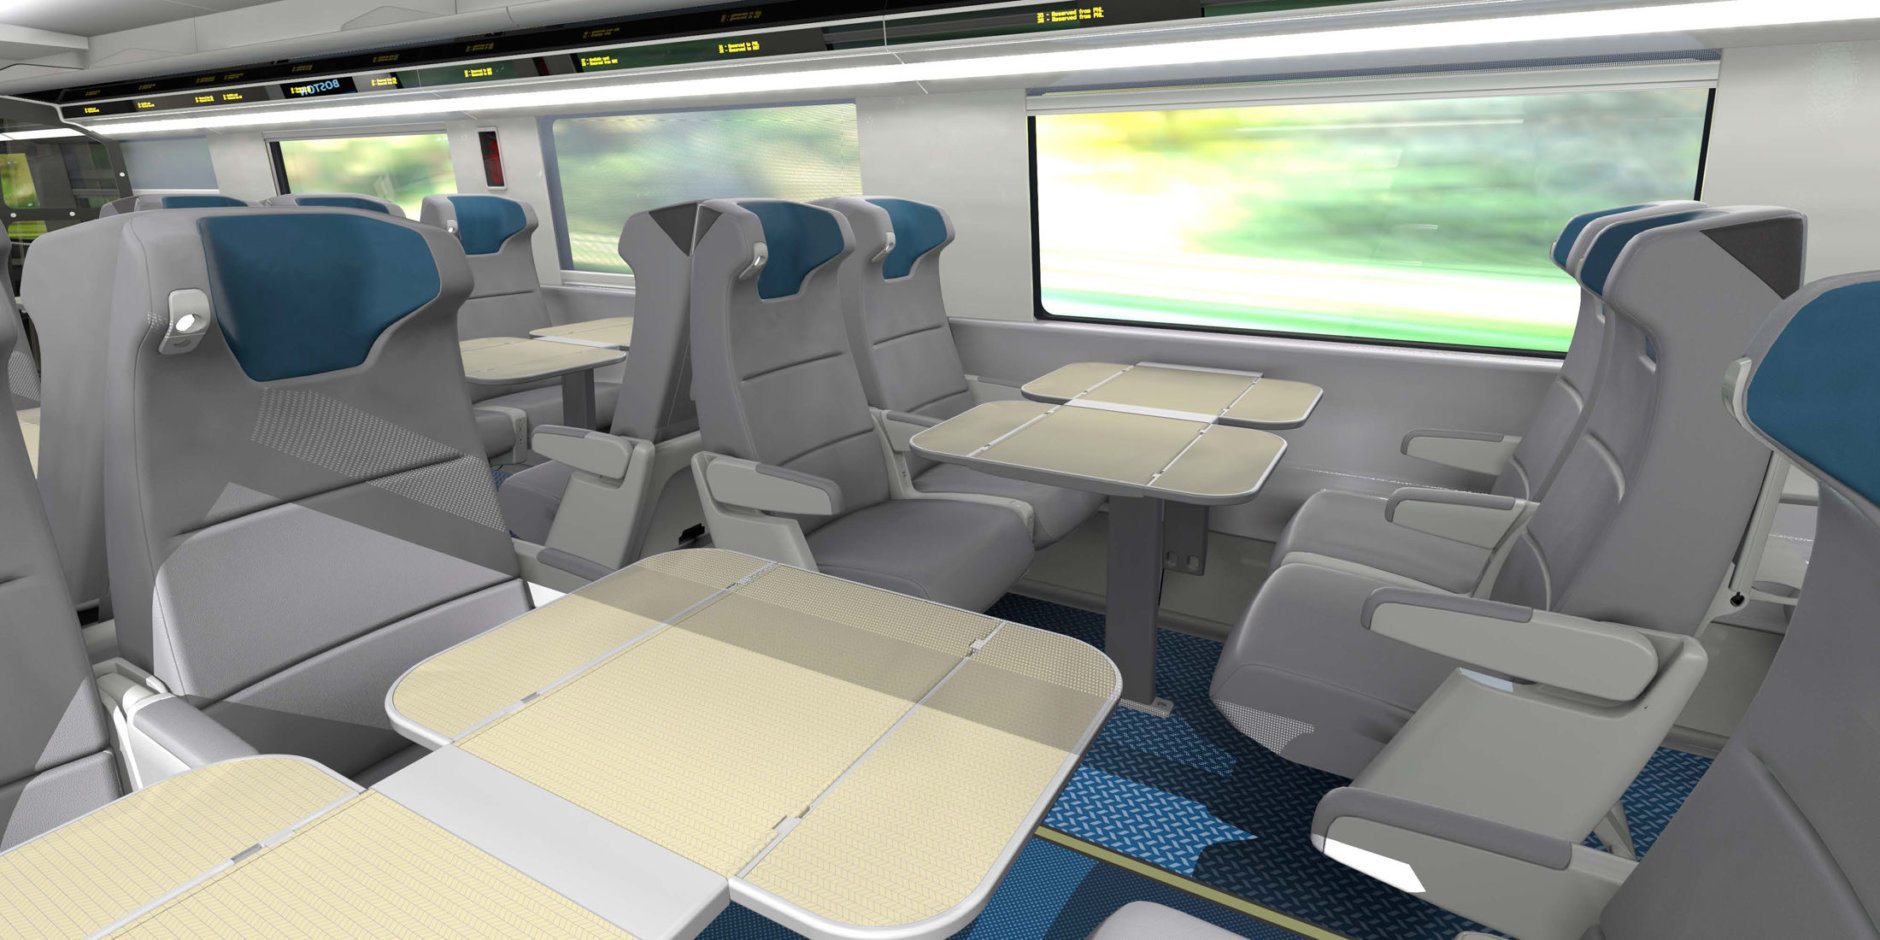 The seats will be leather, with in-seat lighting. (Alstom SA 2018)